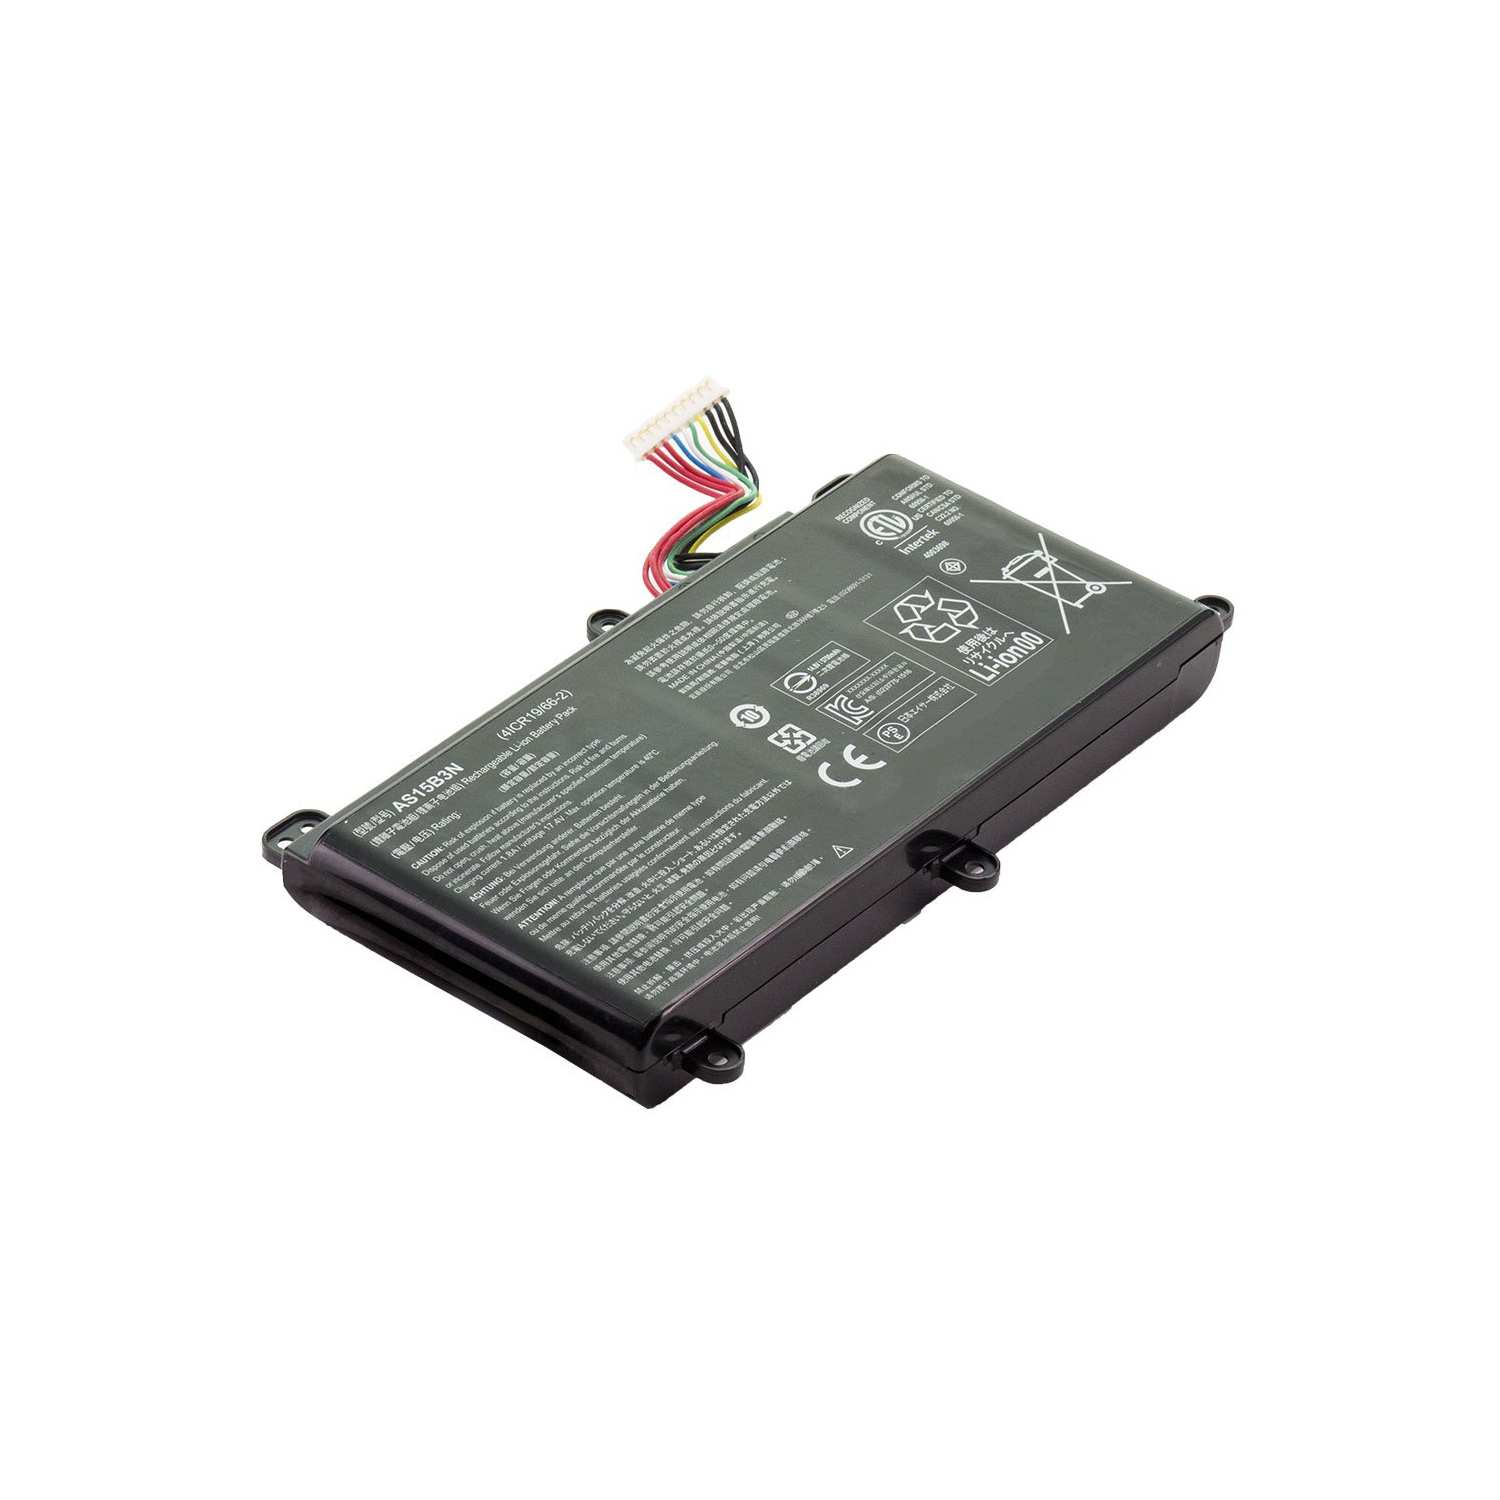 Laptop Battery Replacement for Acer Predator 15 G9-592-70GD, AS15B3N, KT.00803.004, KT.00803.005